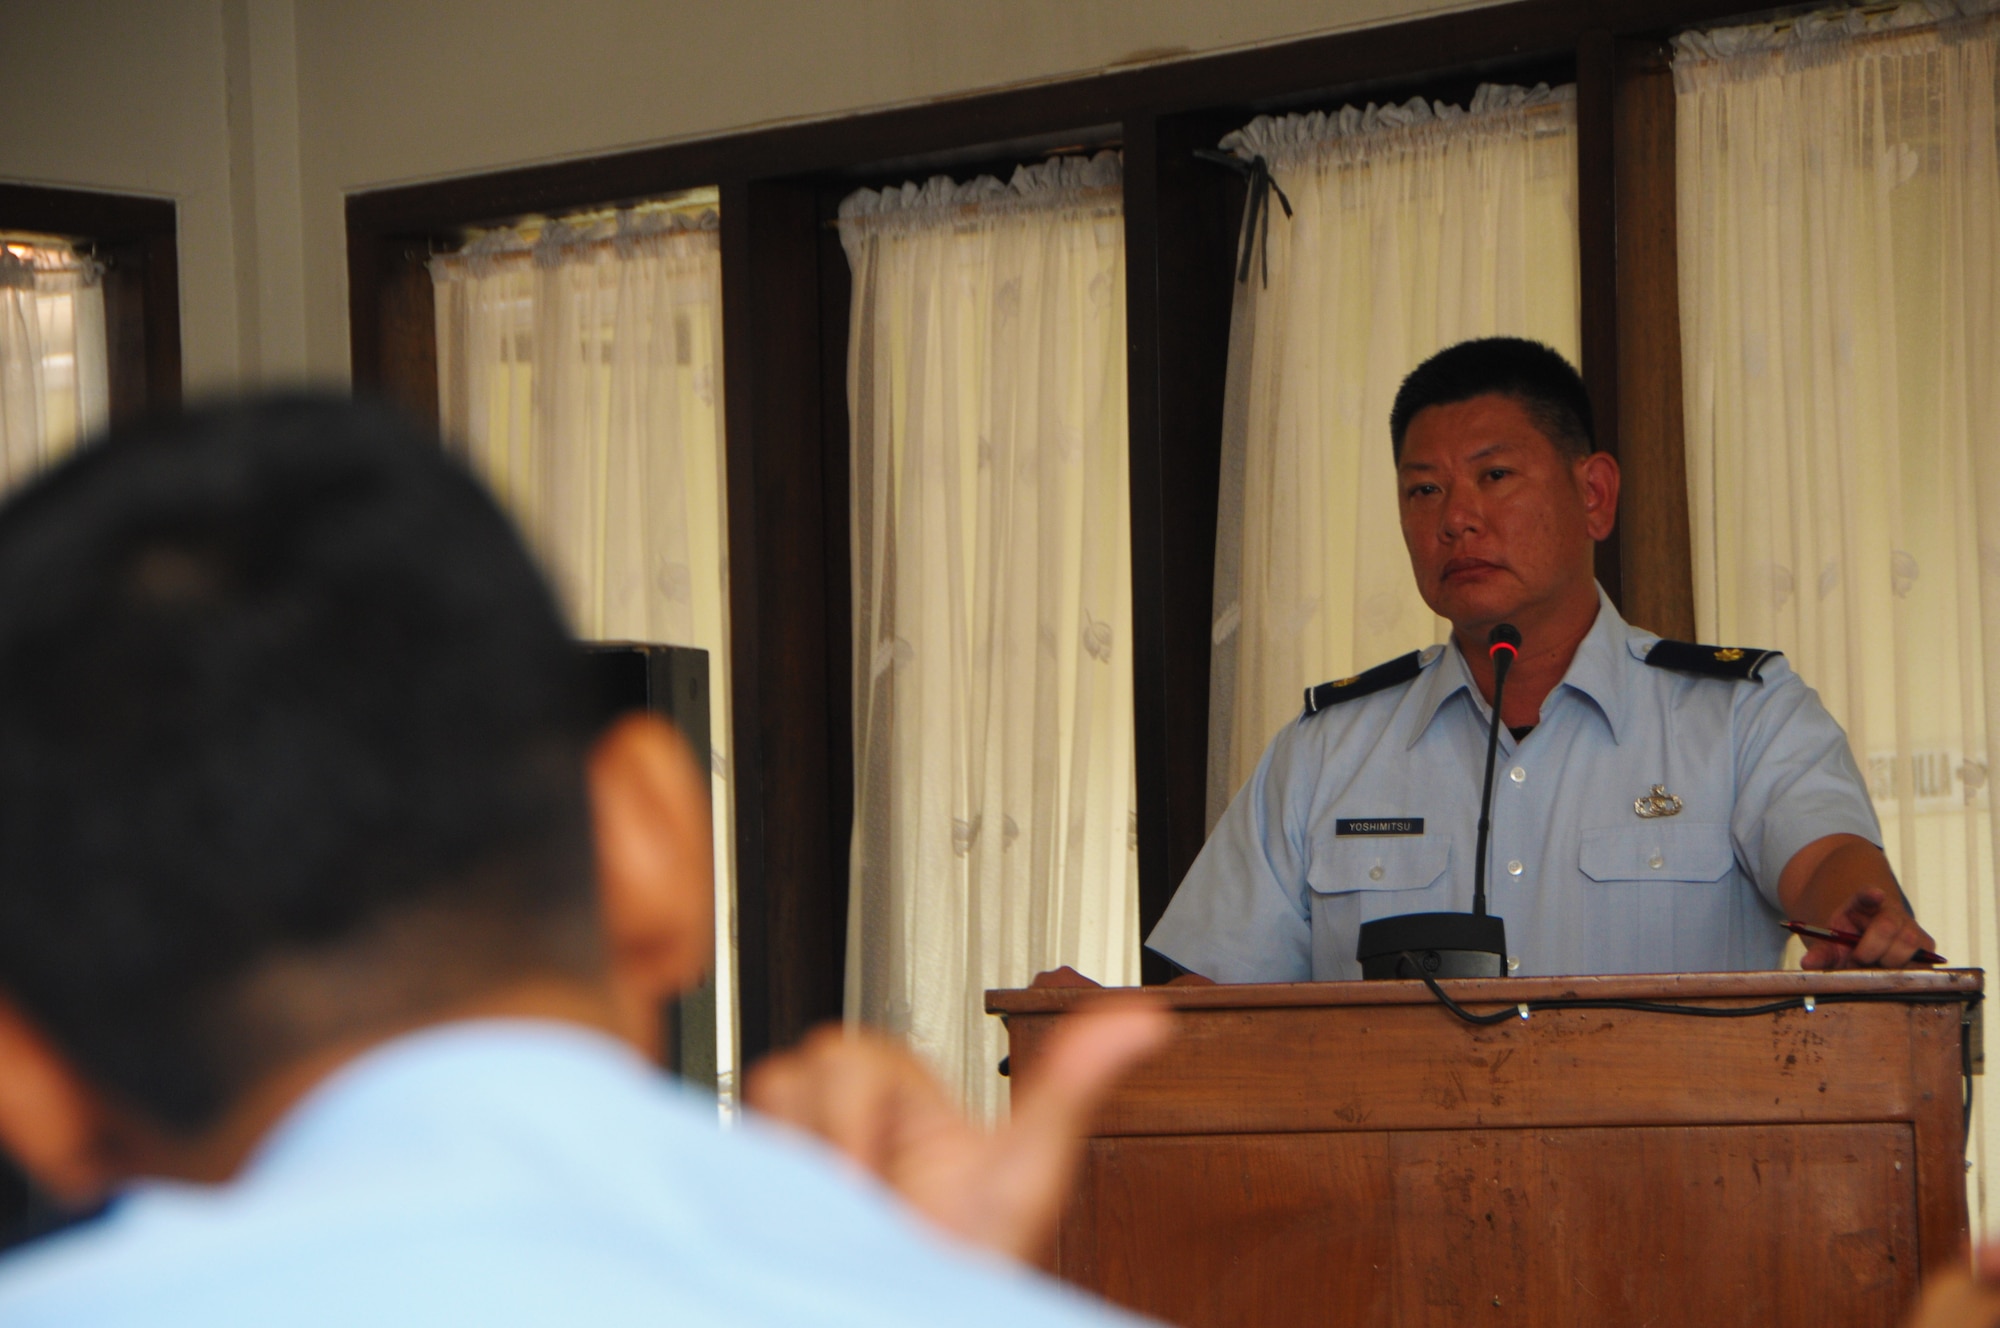 Maj. Colin Yoshimoto, an air battle manager with the 169th Air Defense Squadron, fields questions from a member of Kohanudnas, Sep. 16, 2015, Jakarta, Indonesia. Kohanudnas is the air defense component of the Indonesian armed forces. As part of the National Guard's State Partnership Program, members of the HIANG participated in an air defense subject matter expert exchange with counterparts from Indonesia. (U.S. Air National Guard photo by Senior Airman Orlando Corpuz/released)